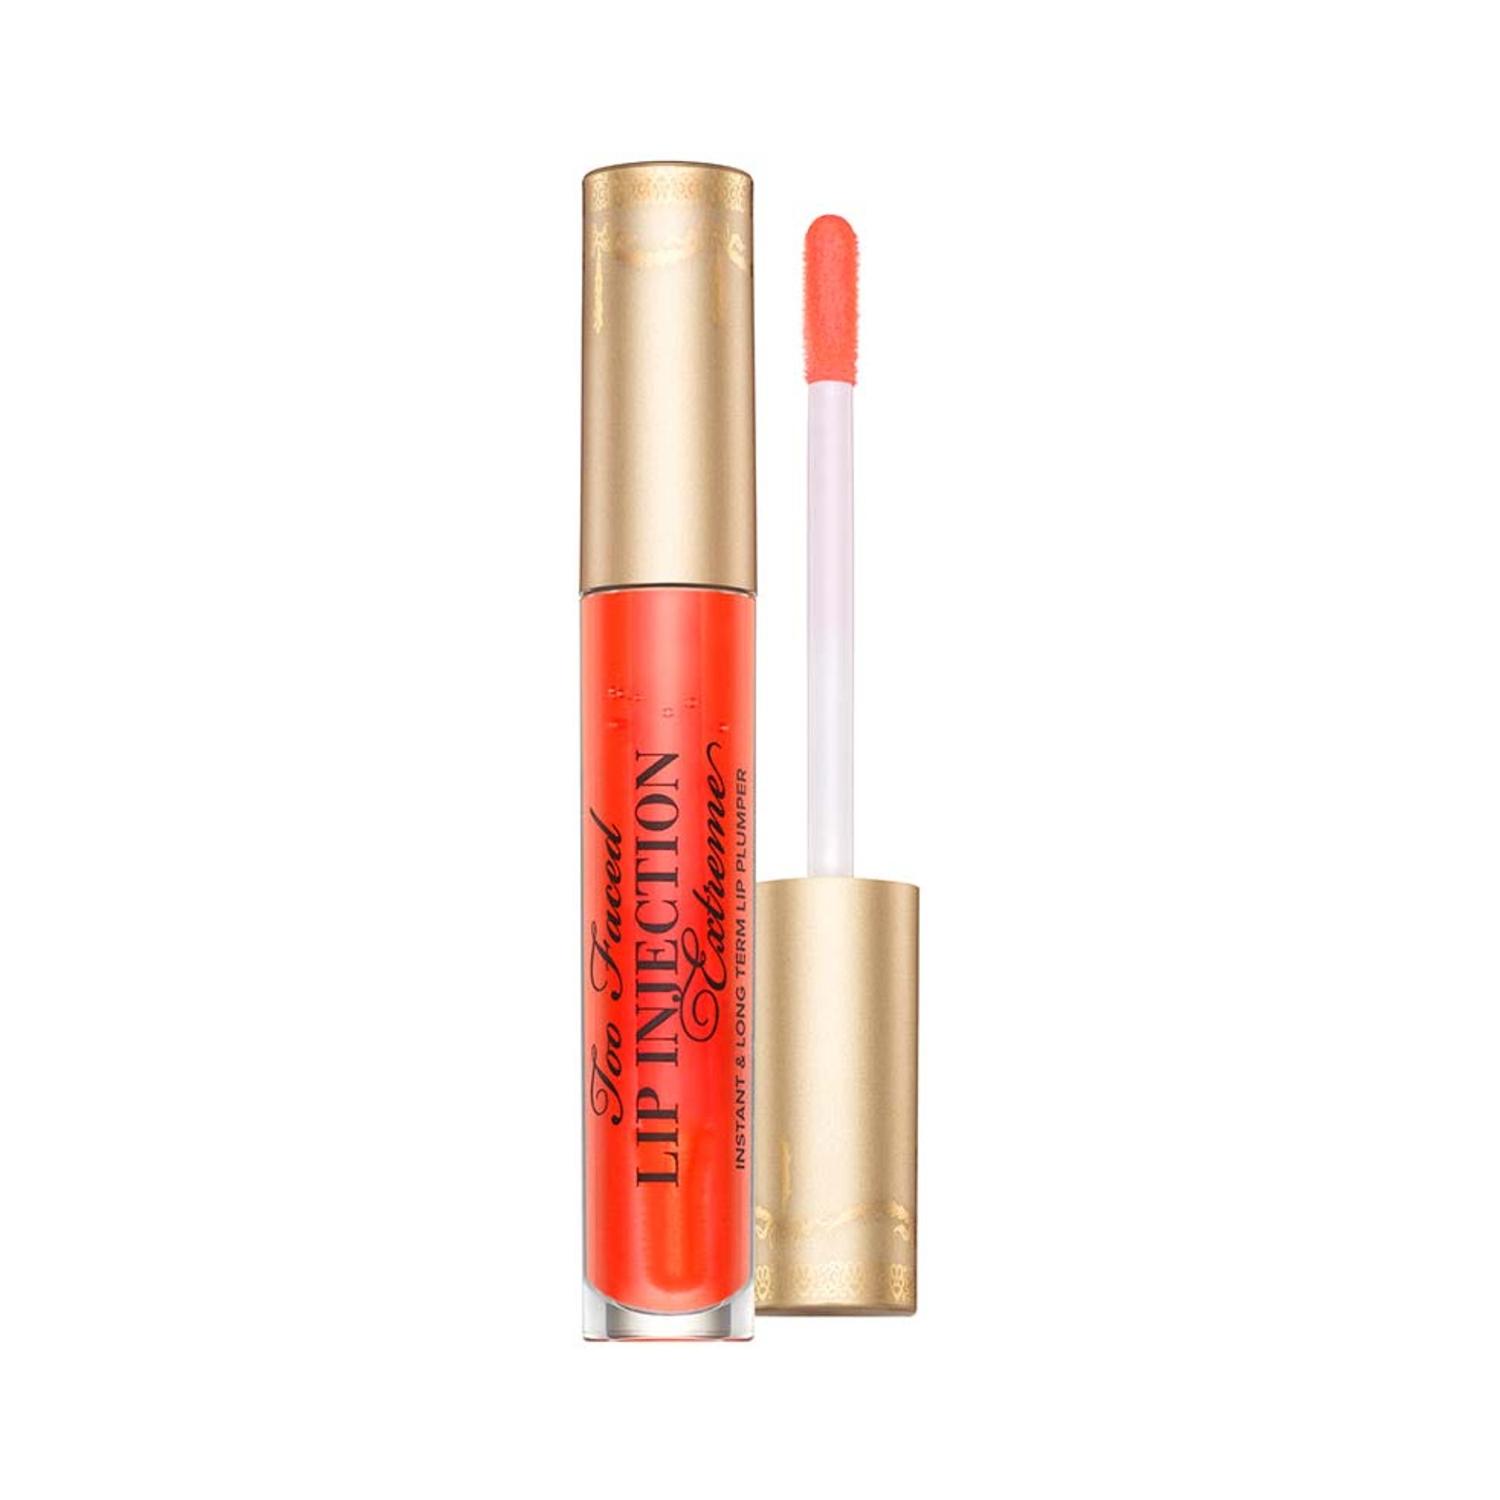 too faced lip injection extreme lip plumper - tangerine dream (4g)